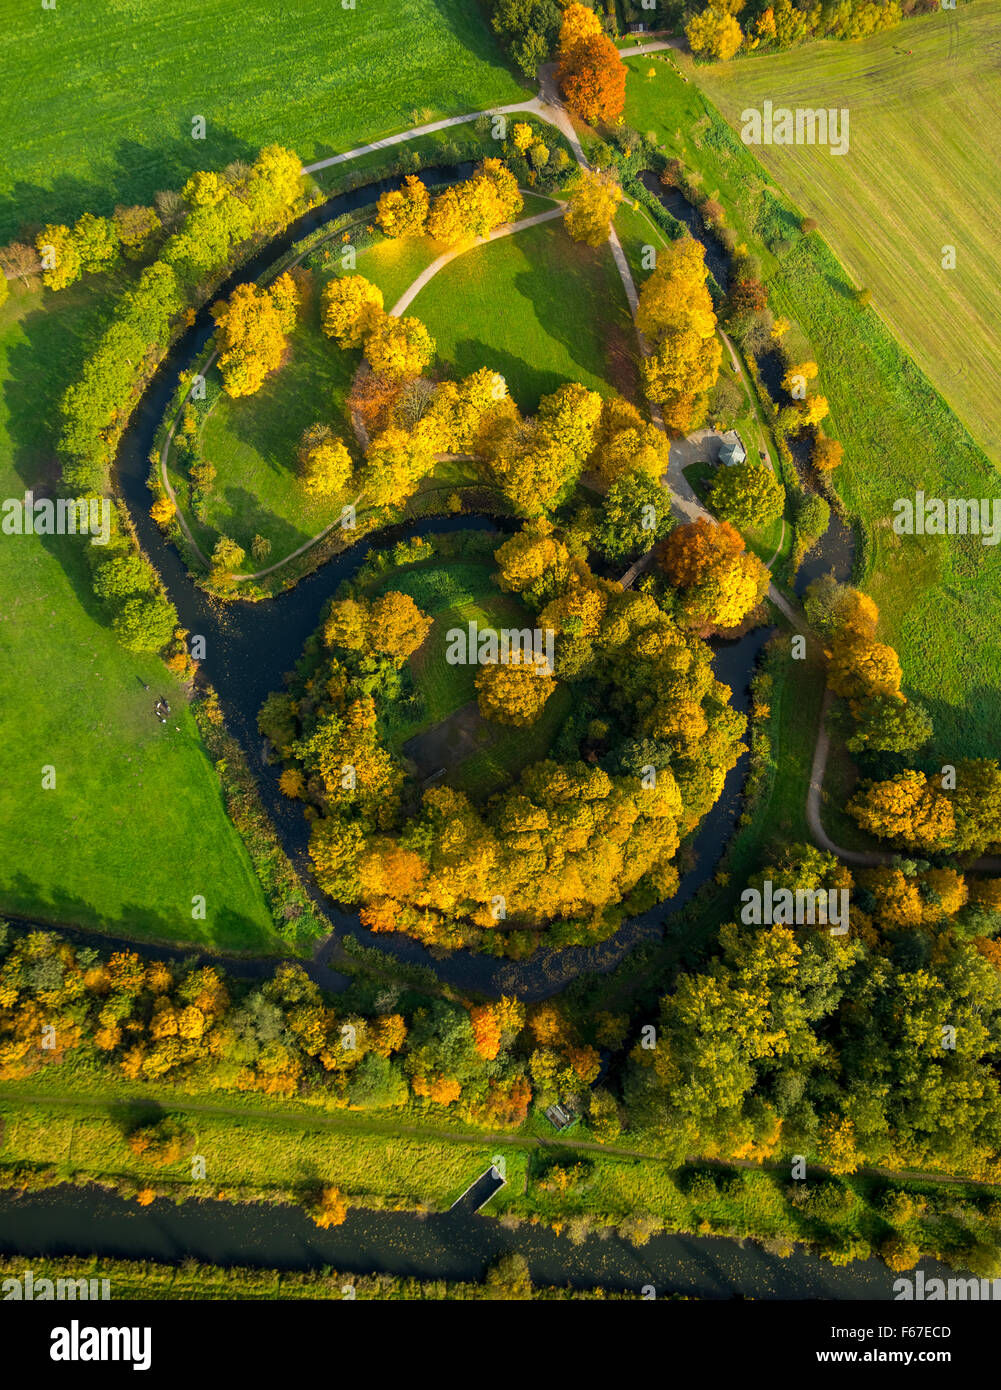 Burghügel Mark, the nucleus of the city of Hamm, former site of the castle, Hamm, Ruhr area, North Rhine-Westphalia, Germany Stock Photo